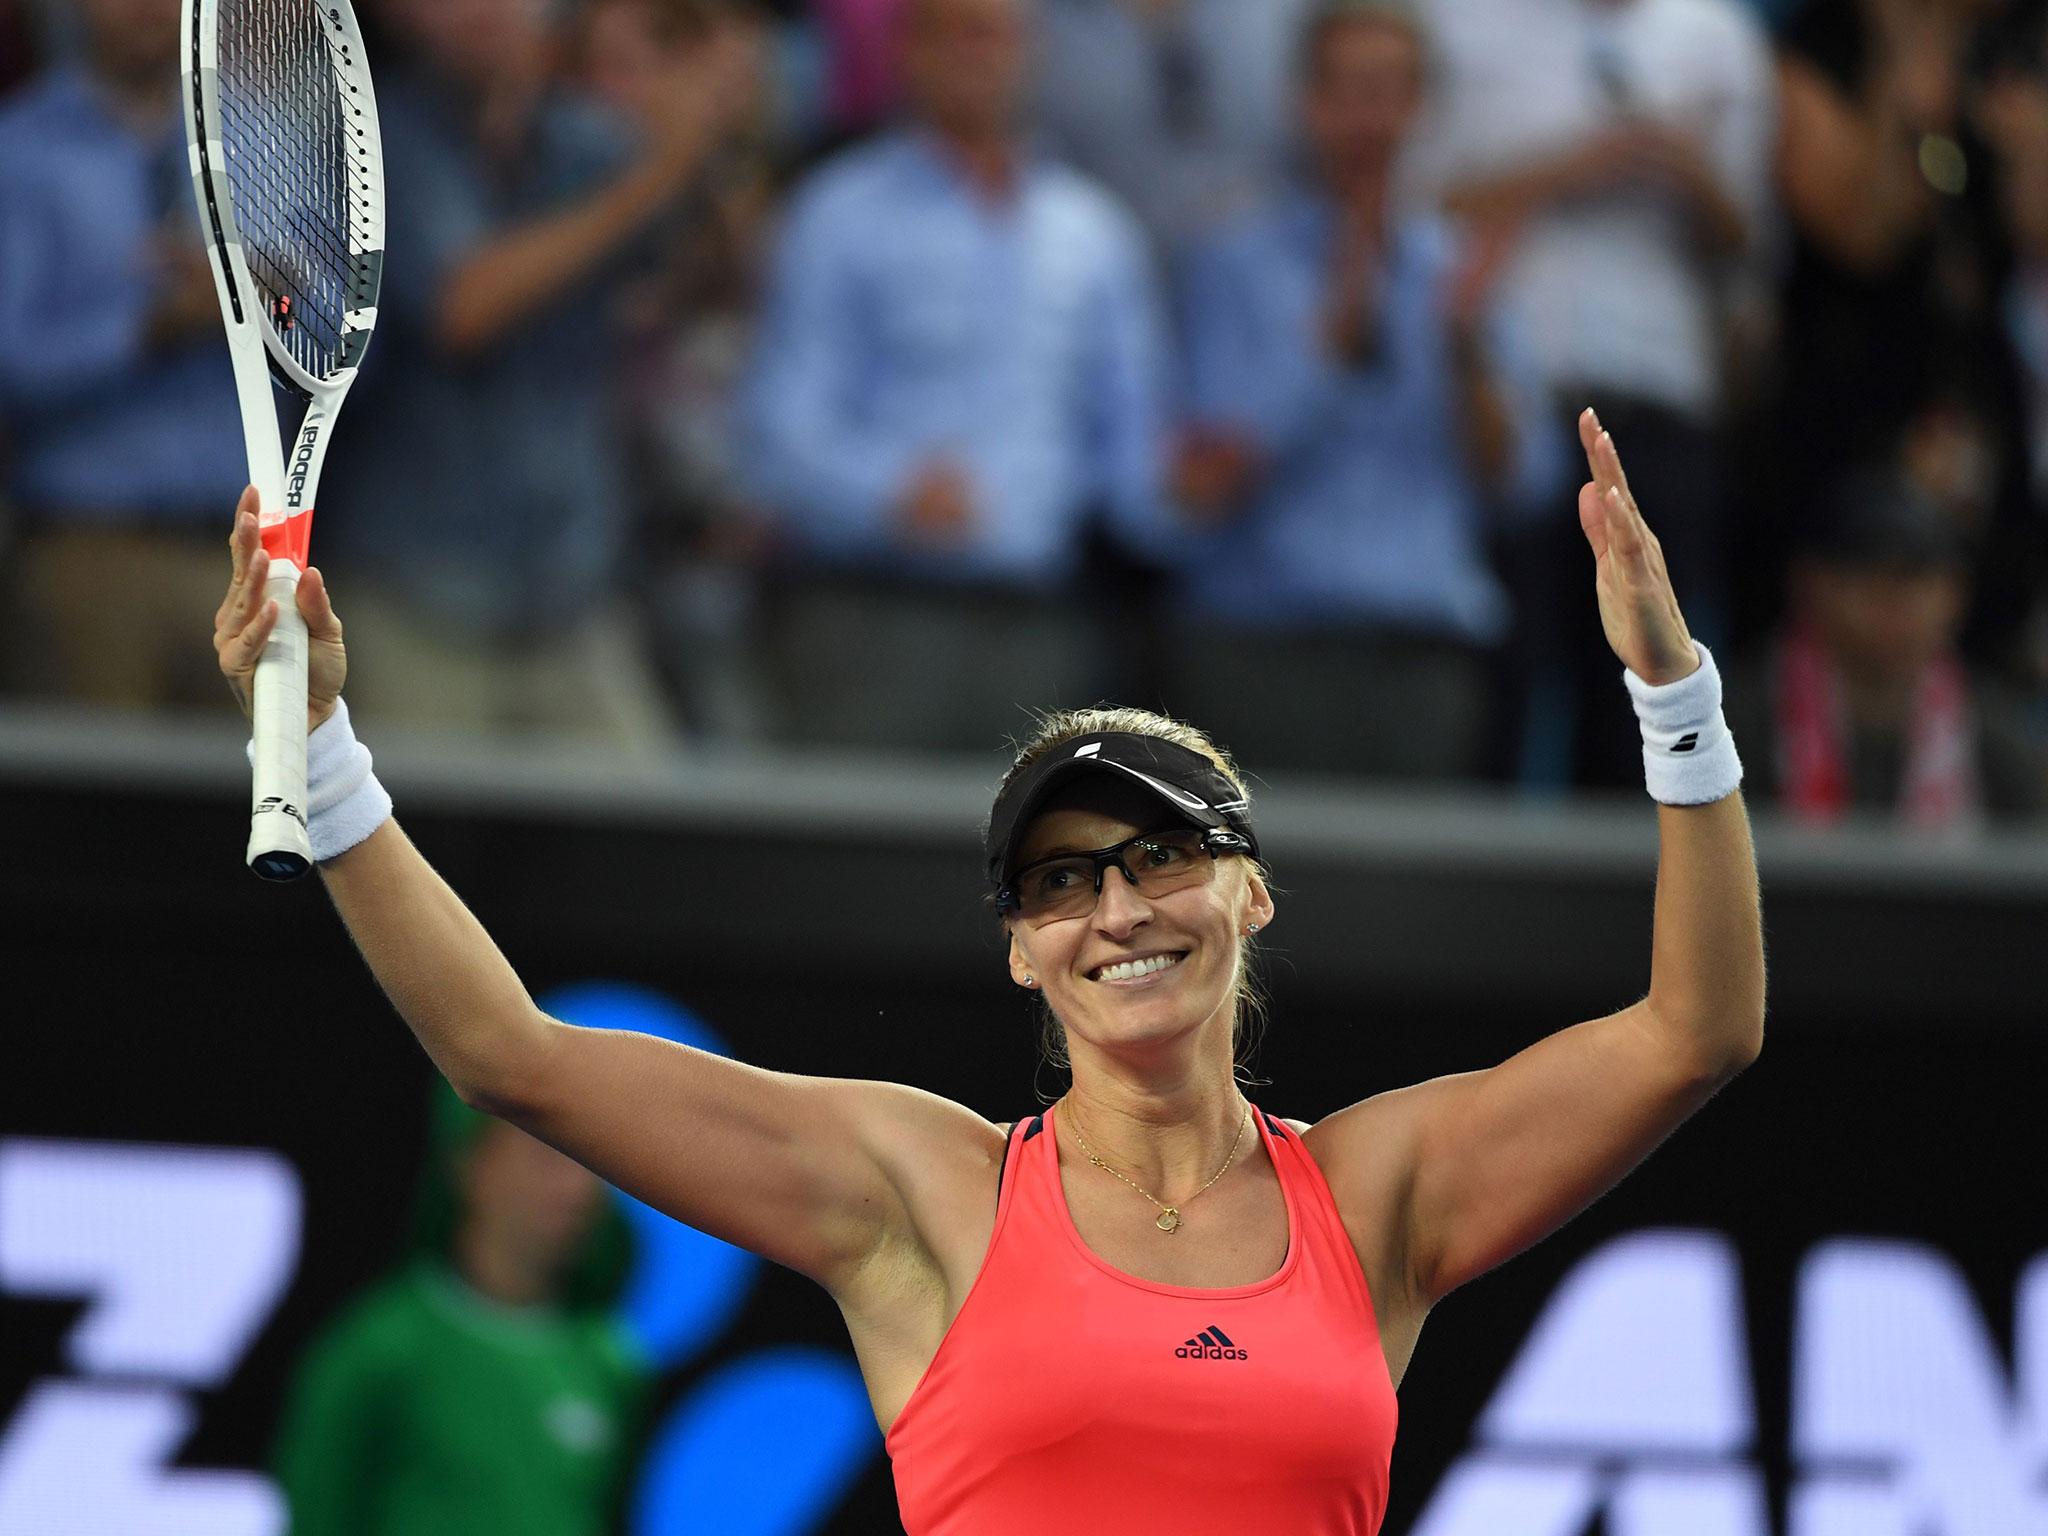 In 2010, Mirjana Lucic-Baroni returned to Grand Slam competition after 11 years of absence